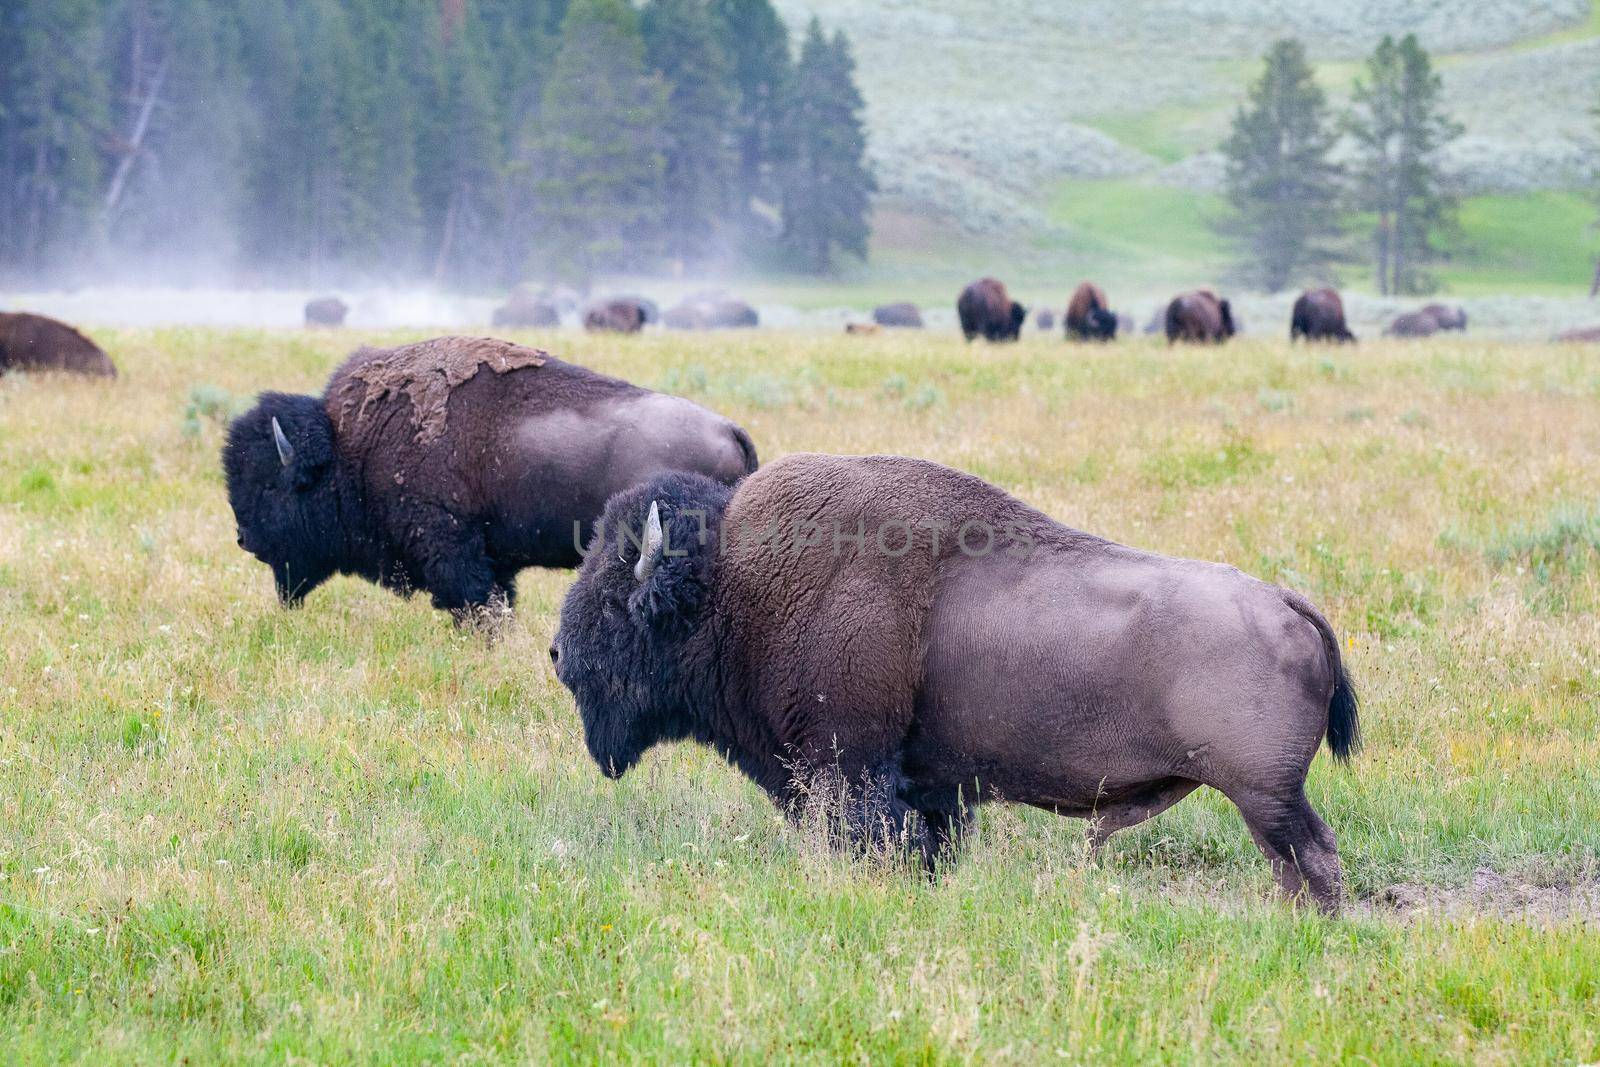 The herd bisons in Yellowstone National Park, Wyoming. USA.  The Yellowstone Park bison herd in Yellowstone National Park is probably the oldest and largest public bison herd in the United States.